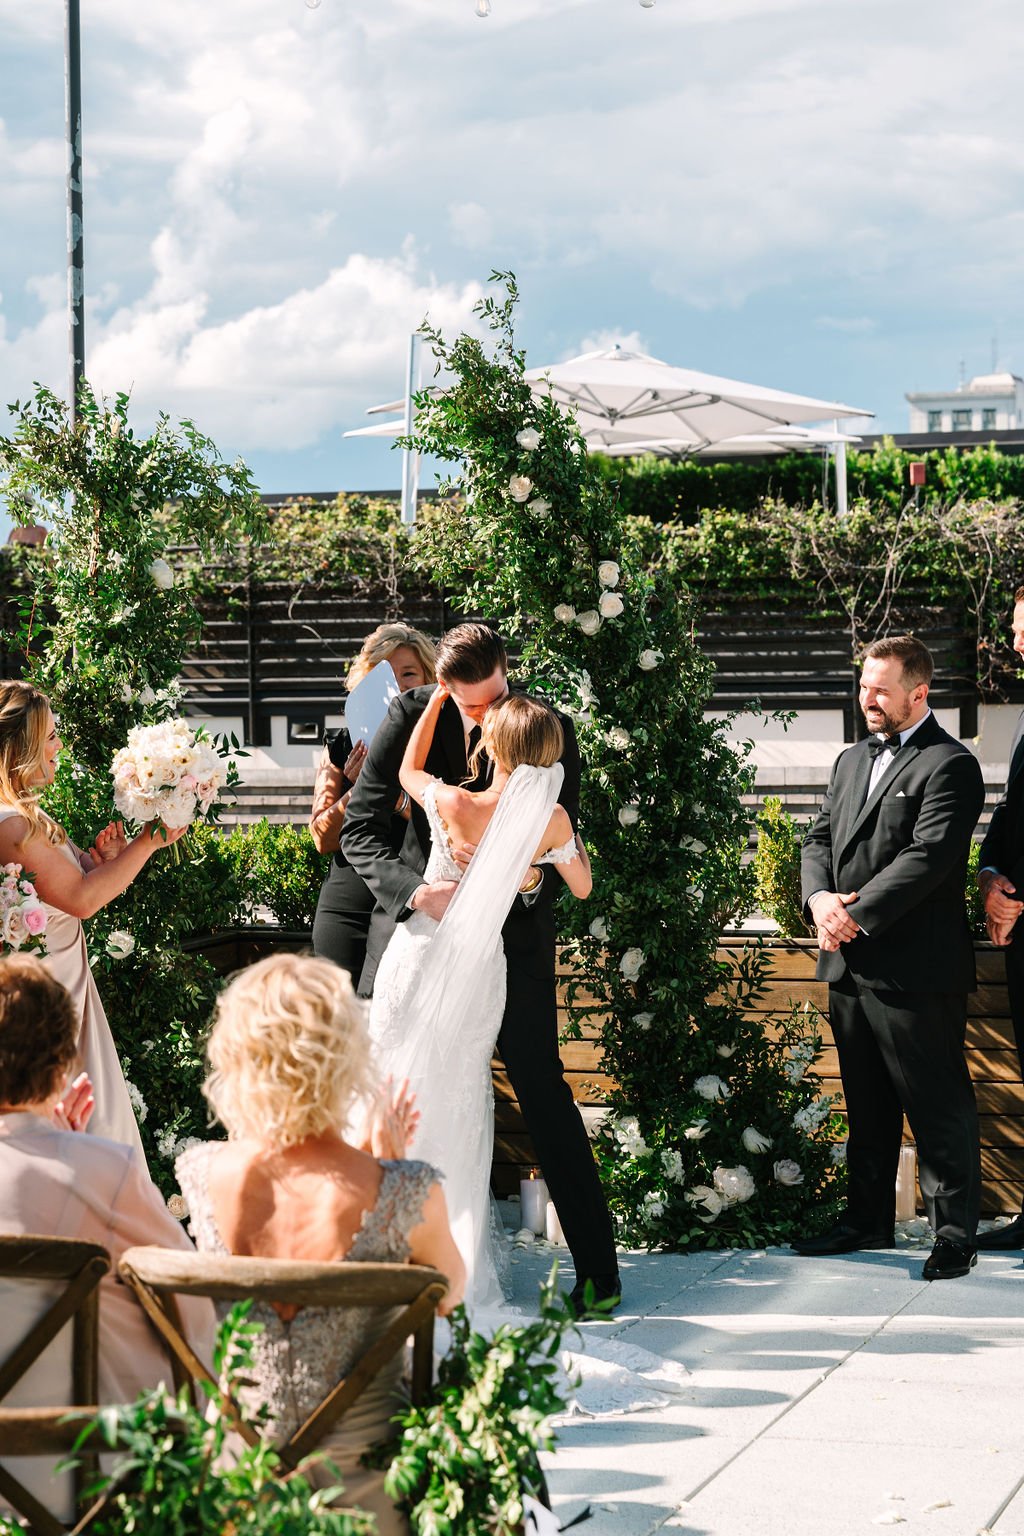 hayley-and-chris-romantic-rooftop-wedding-at-the-perry-lane-in-savannah-ga-featuring-organic-lush-wedding-florals-designed-by-ivory-and-beau-15.jpg